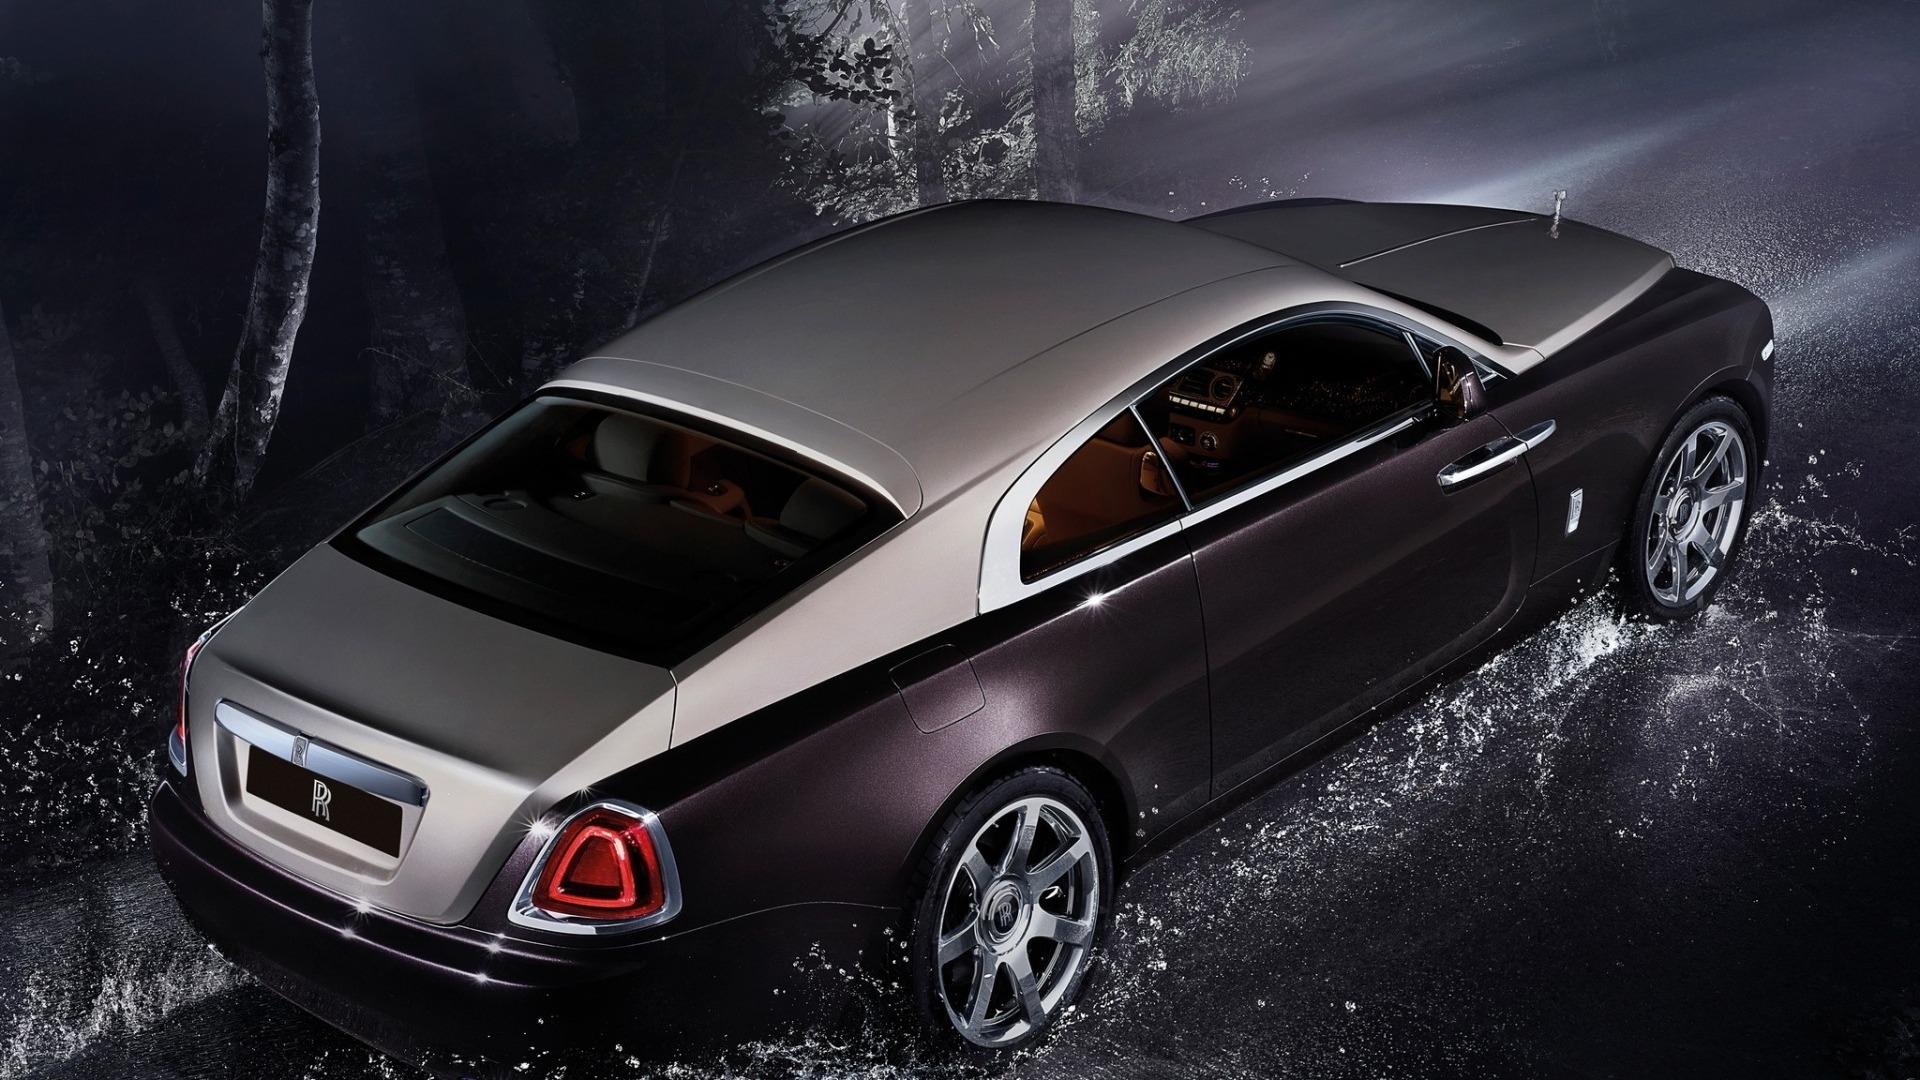 Gorgeous Coupe Rolls Royce for 1920 x 1080 HDTV 1080p resolution